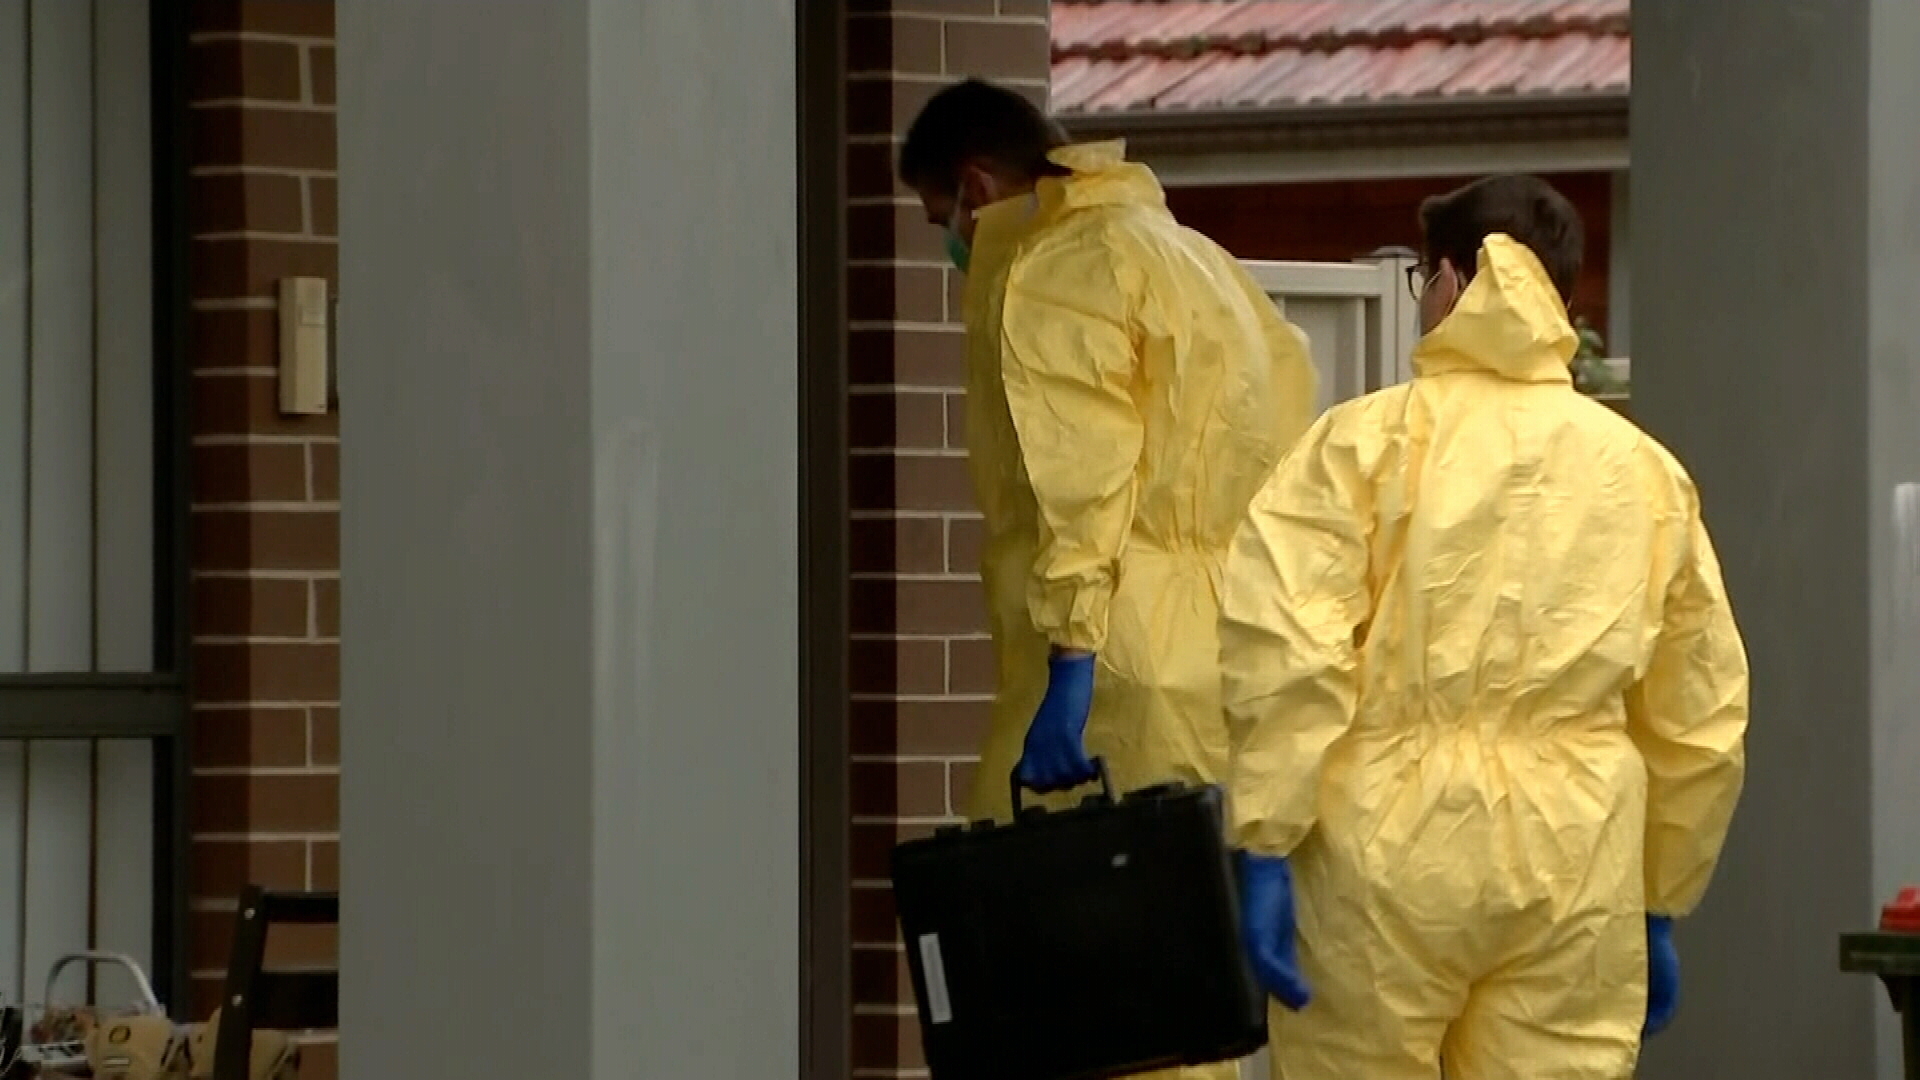 Forensic police at the crime scene in Quakers Hill.